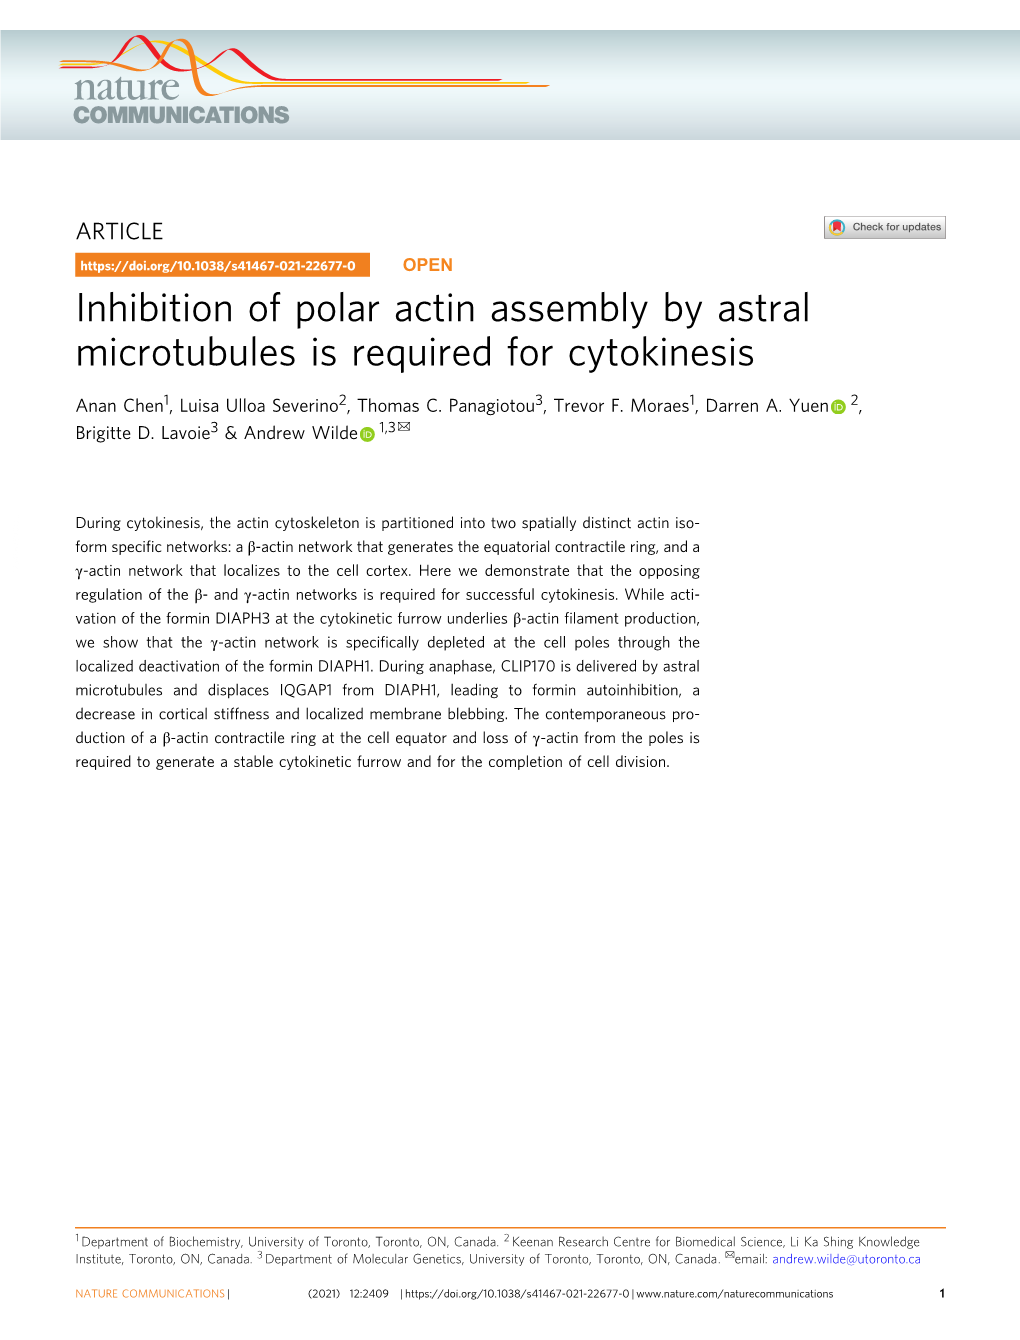 Inhibition of Polar Actin Assembly by Astral Microtubules Is Required for Cytokinesis